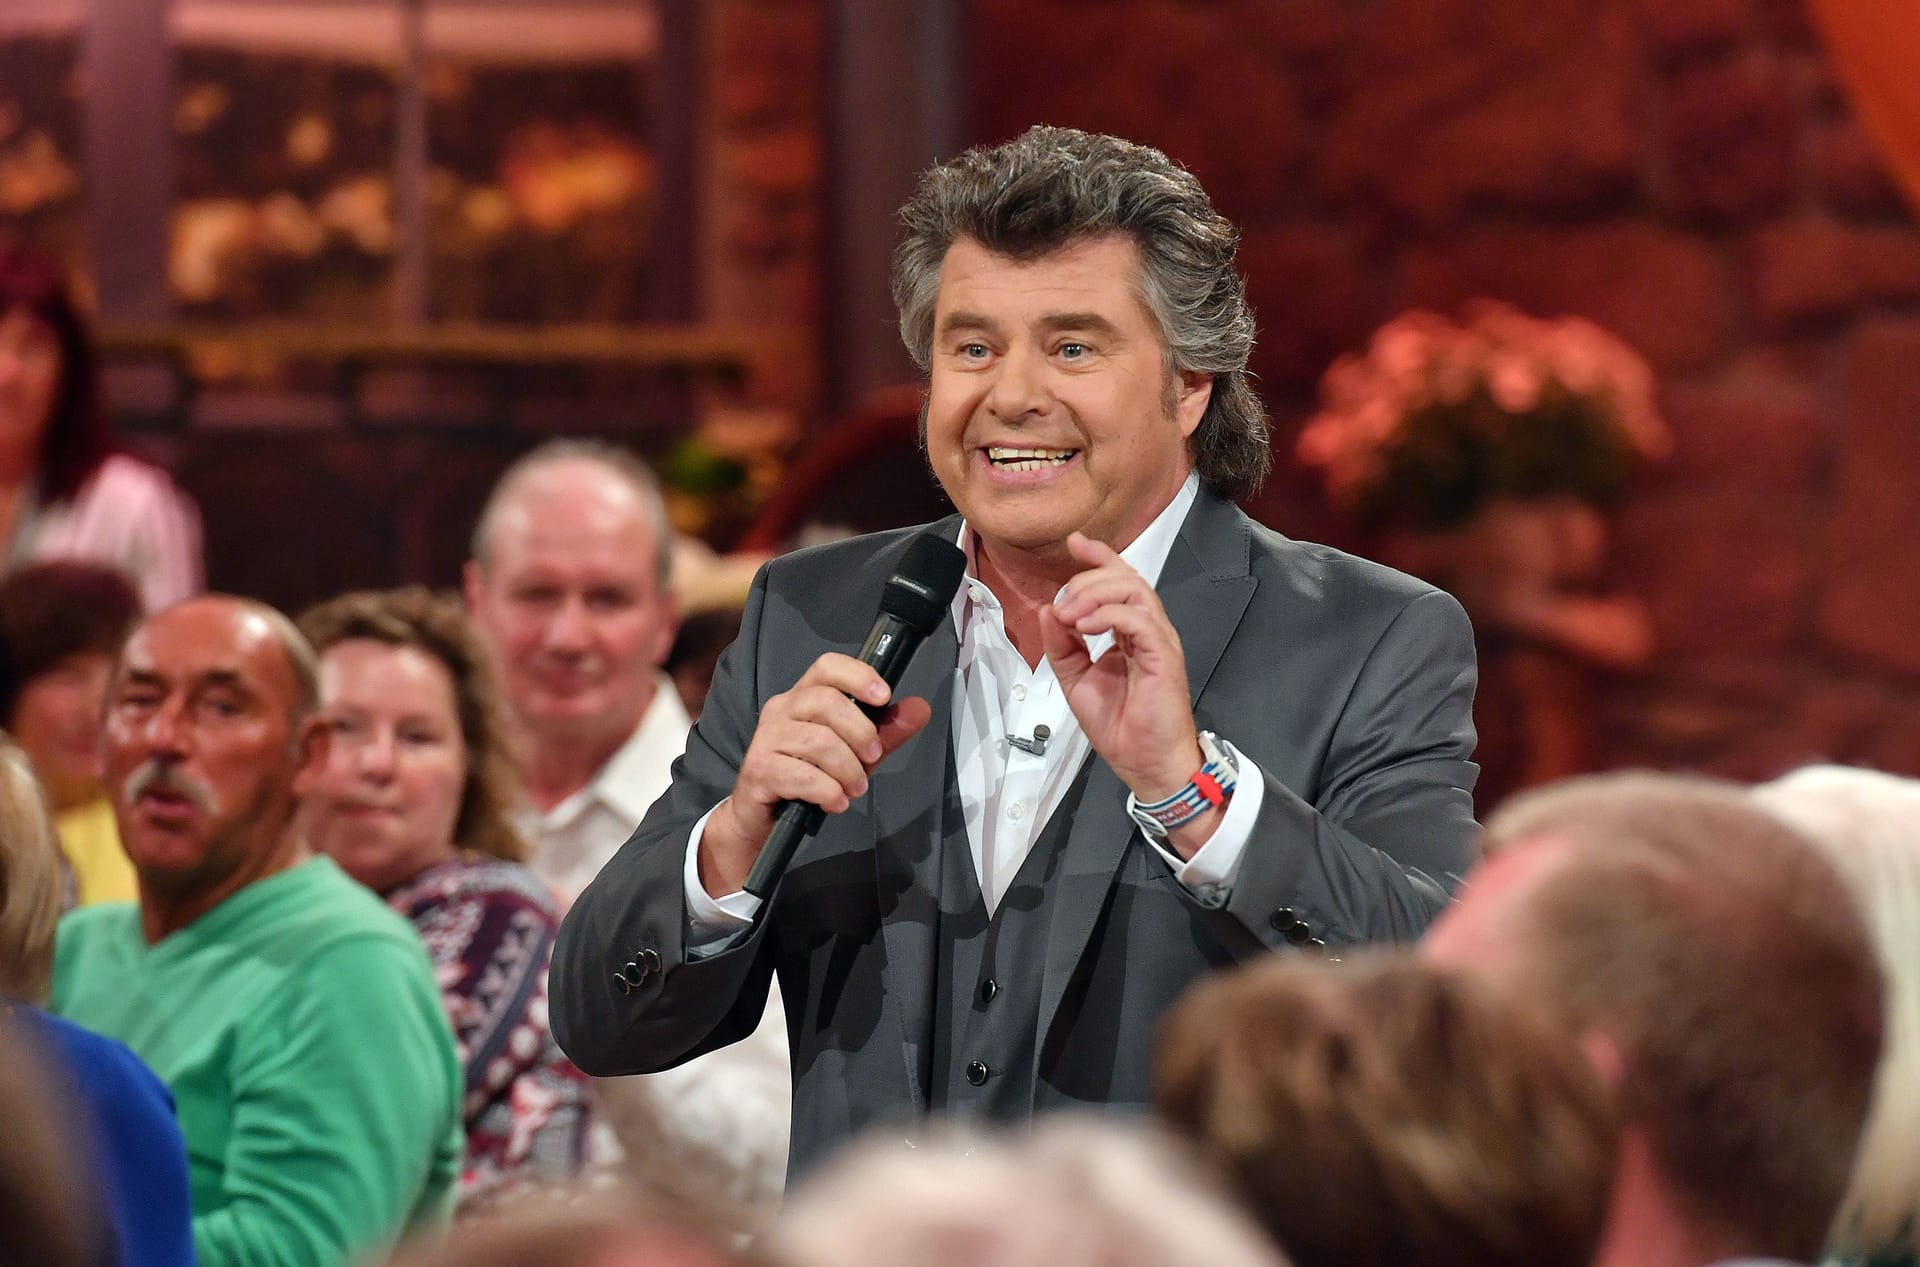 The show "Schlager-Spaß mit Andy Borg" has been running on SWR since 2018.